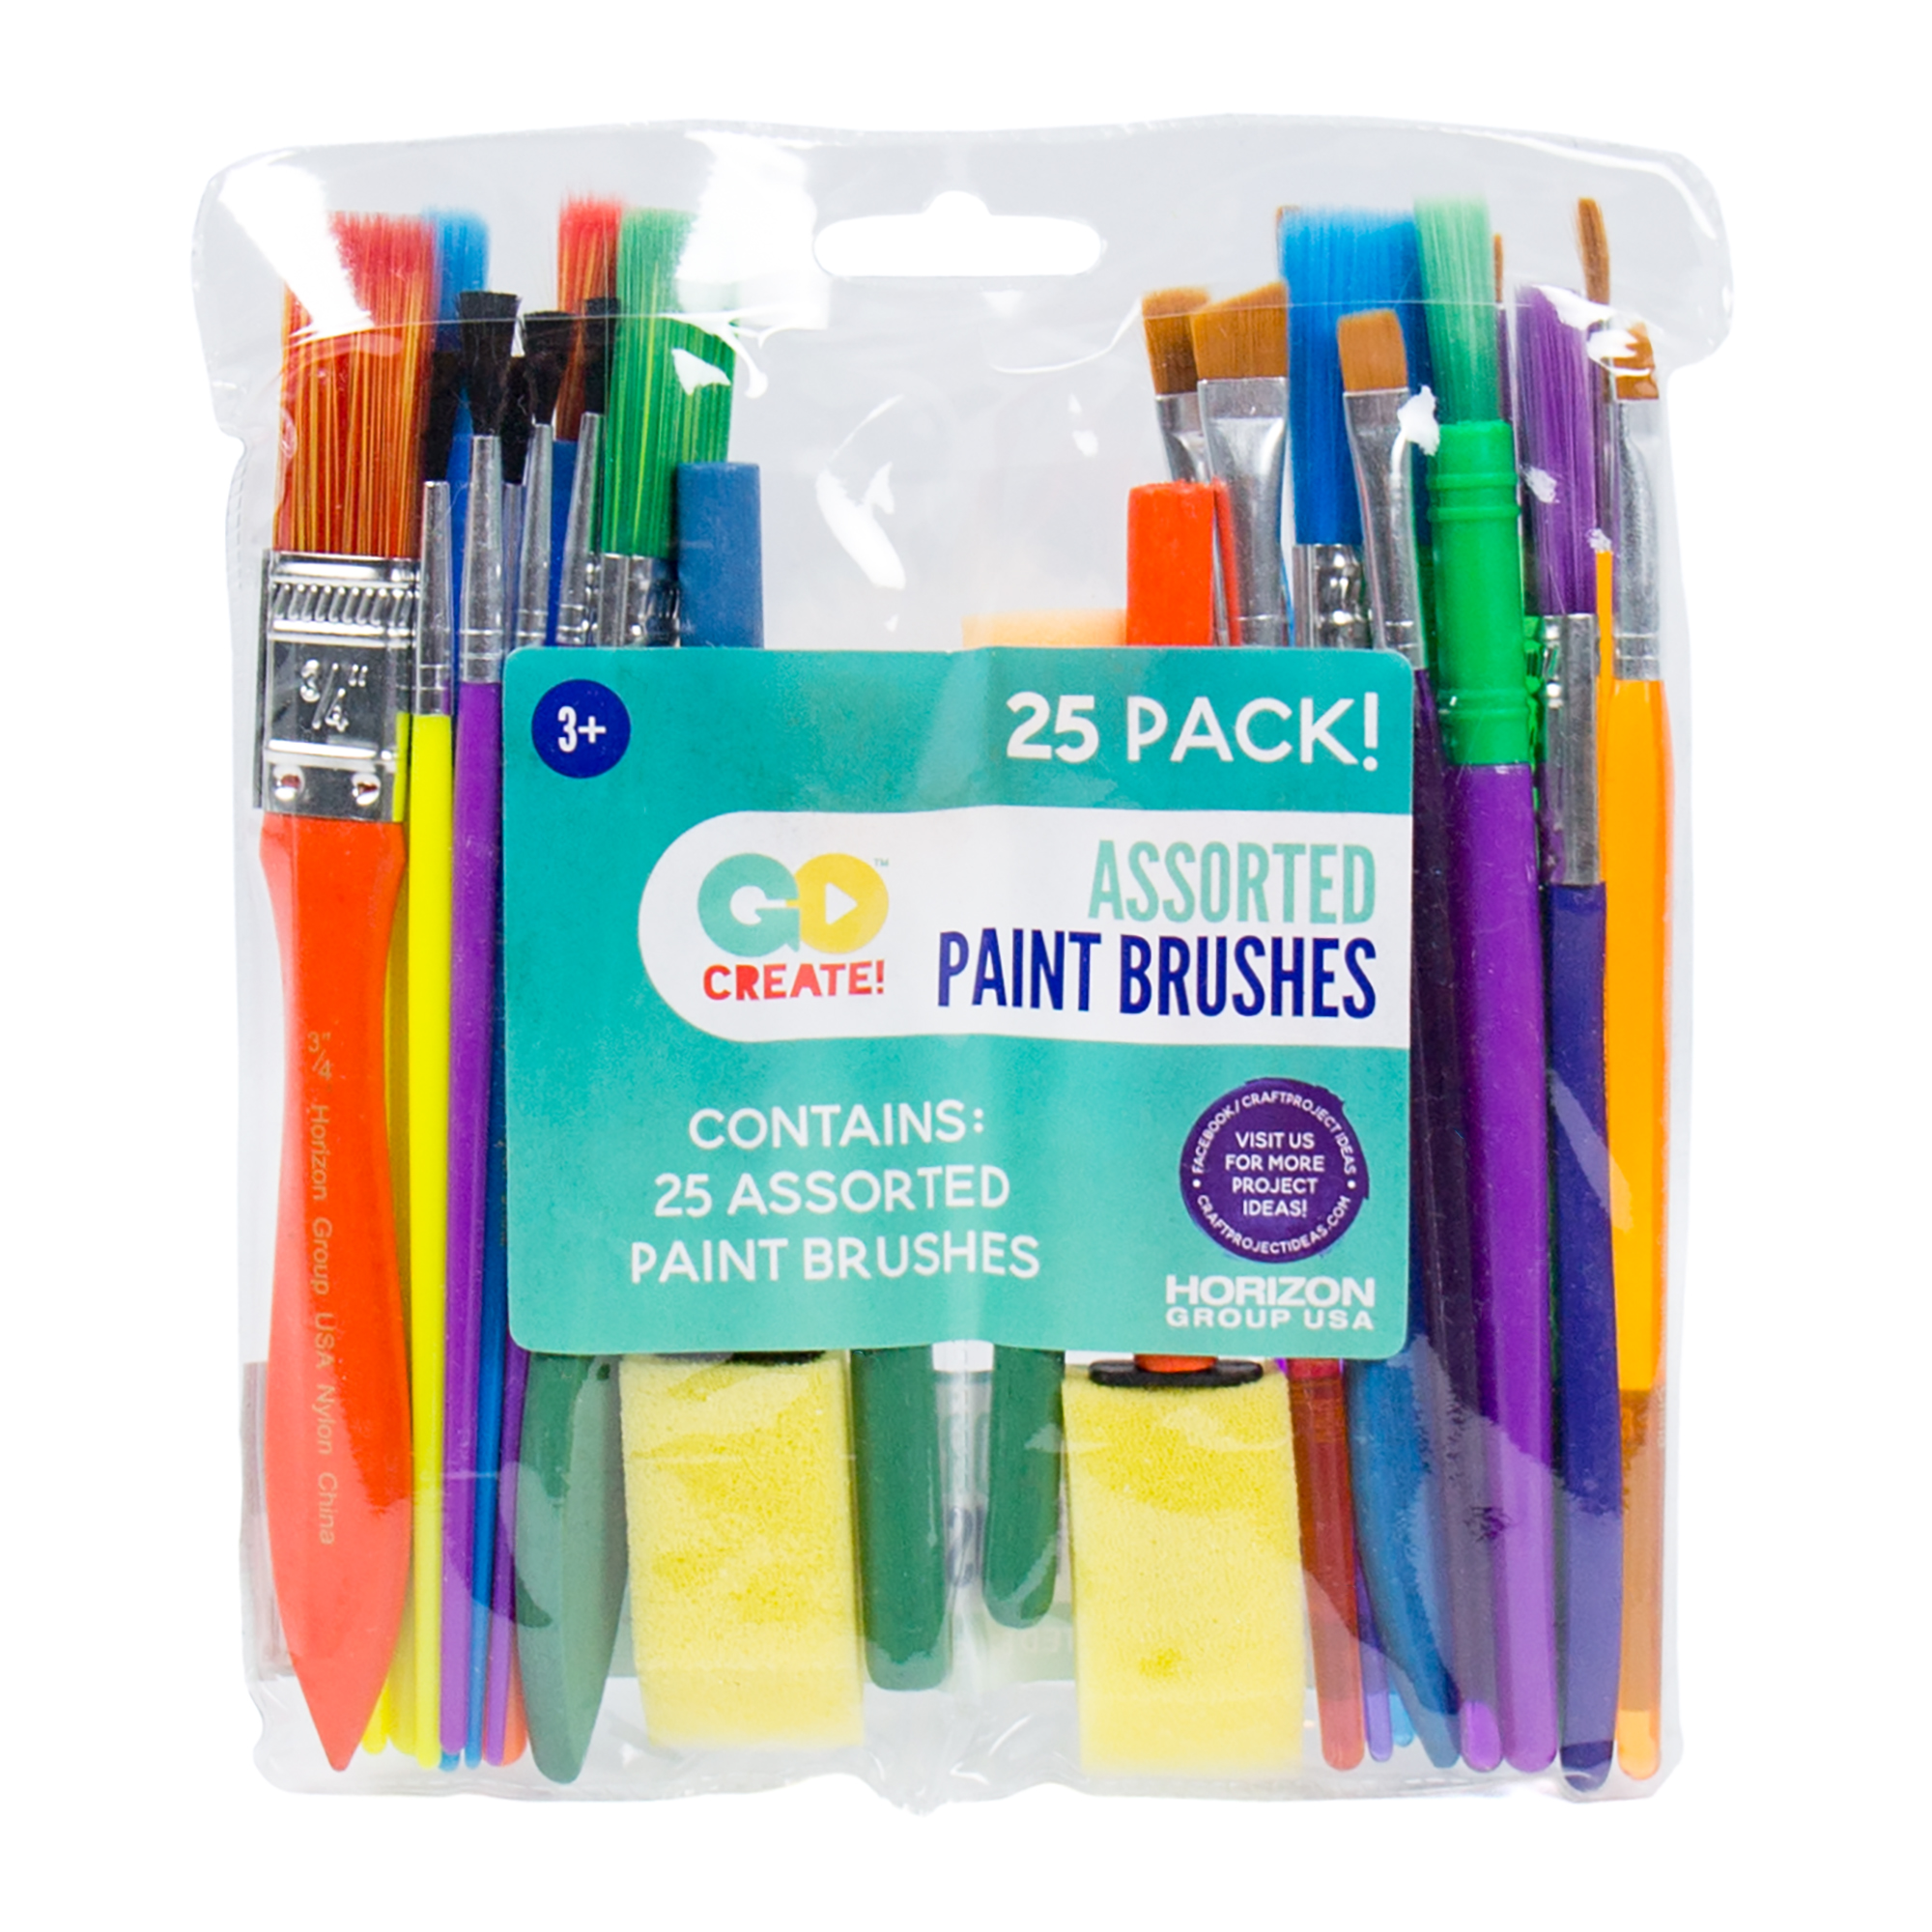 Go Create Assorted Paint Brushes, 25 ct. - image 1 of 5